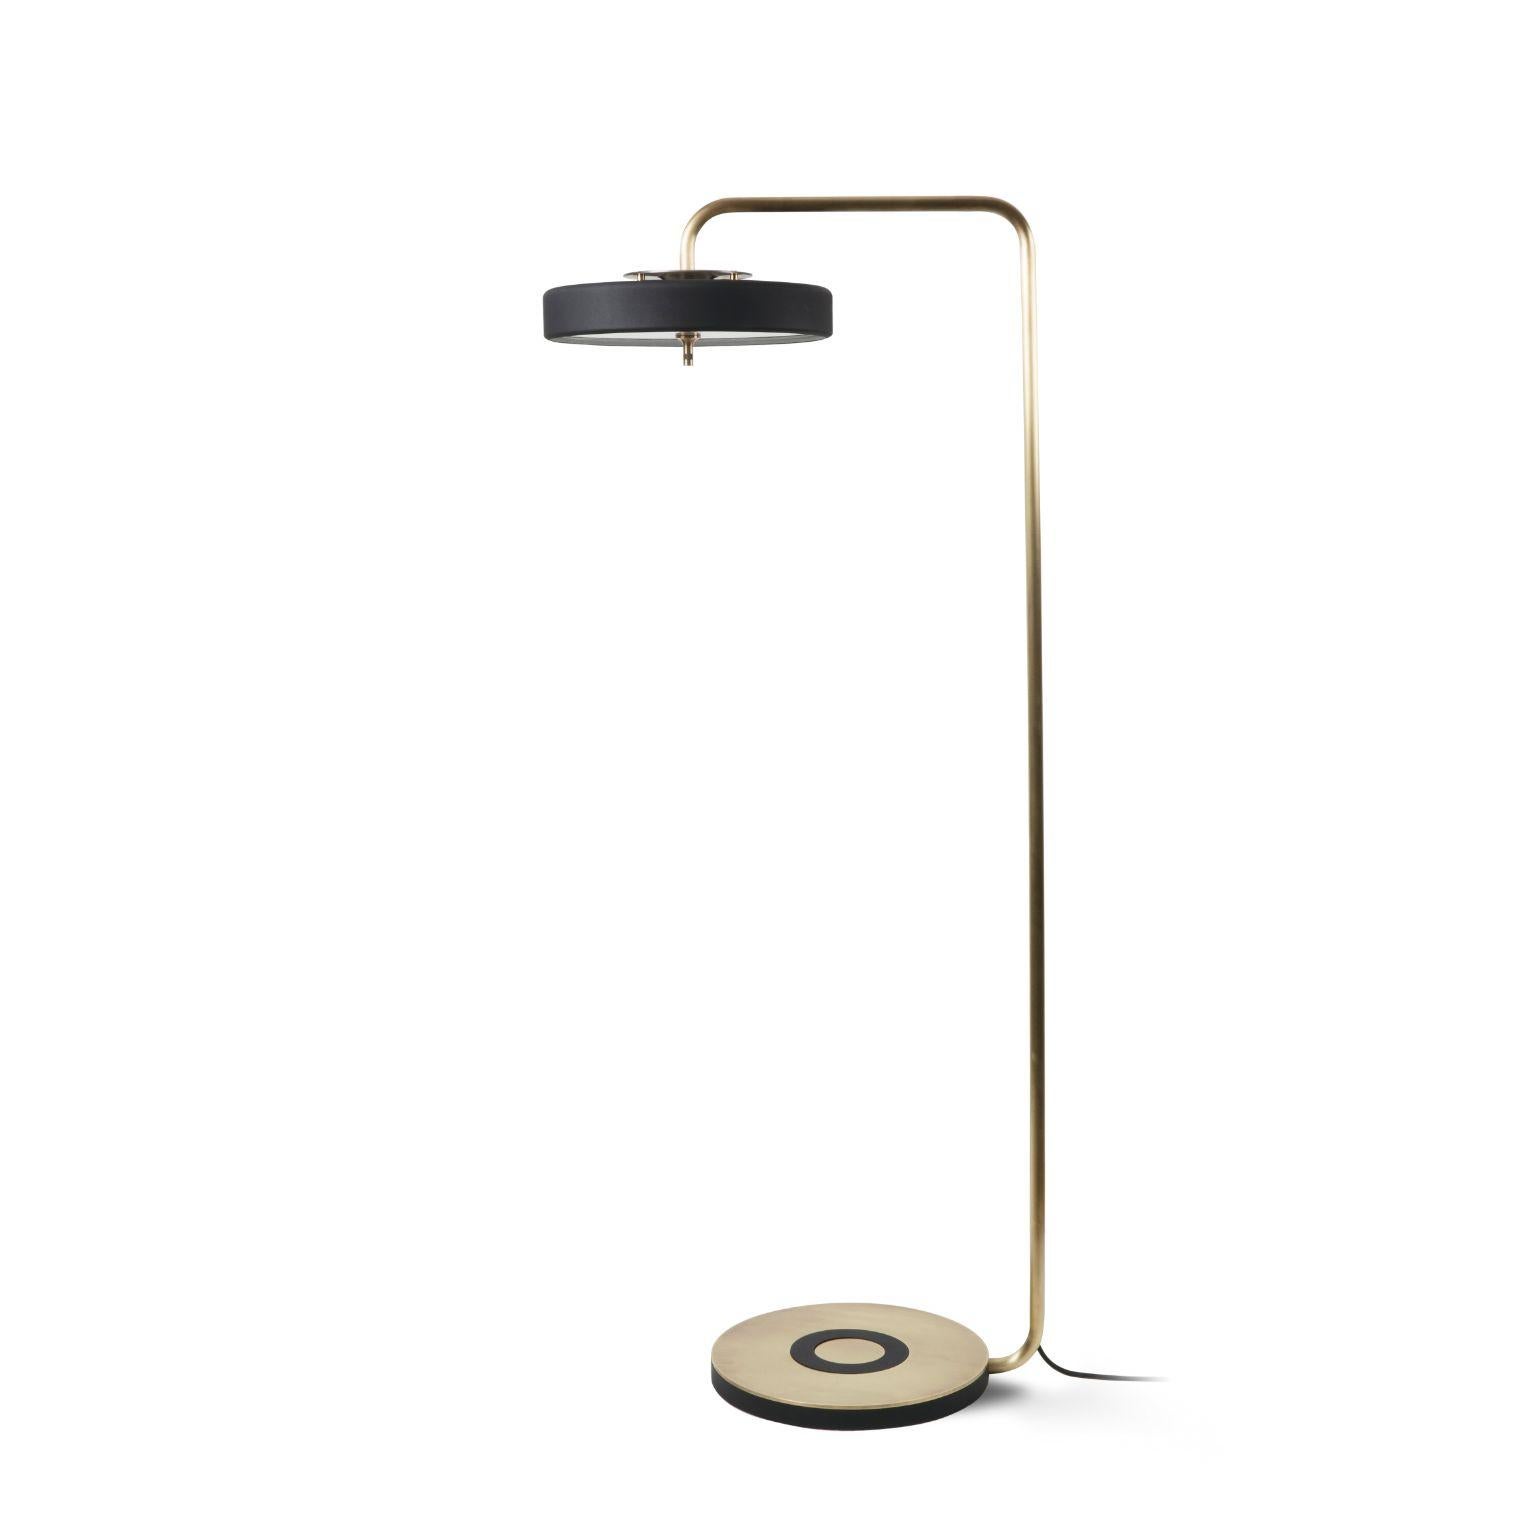 Revolve floor lamp - Brushed brass - Black by Bert Frank
Dimensions: 130 x 35.4 x 9.3 cm
Materials: Brass, Steel

Also available in polished brass
When Adam Yeats and Robbie Llewellyn founded Bert Frank in 2013 it was a meeting of minds and the